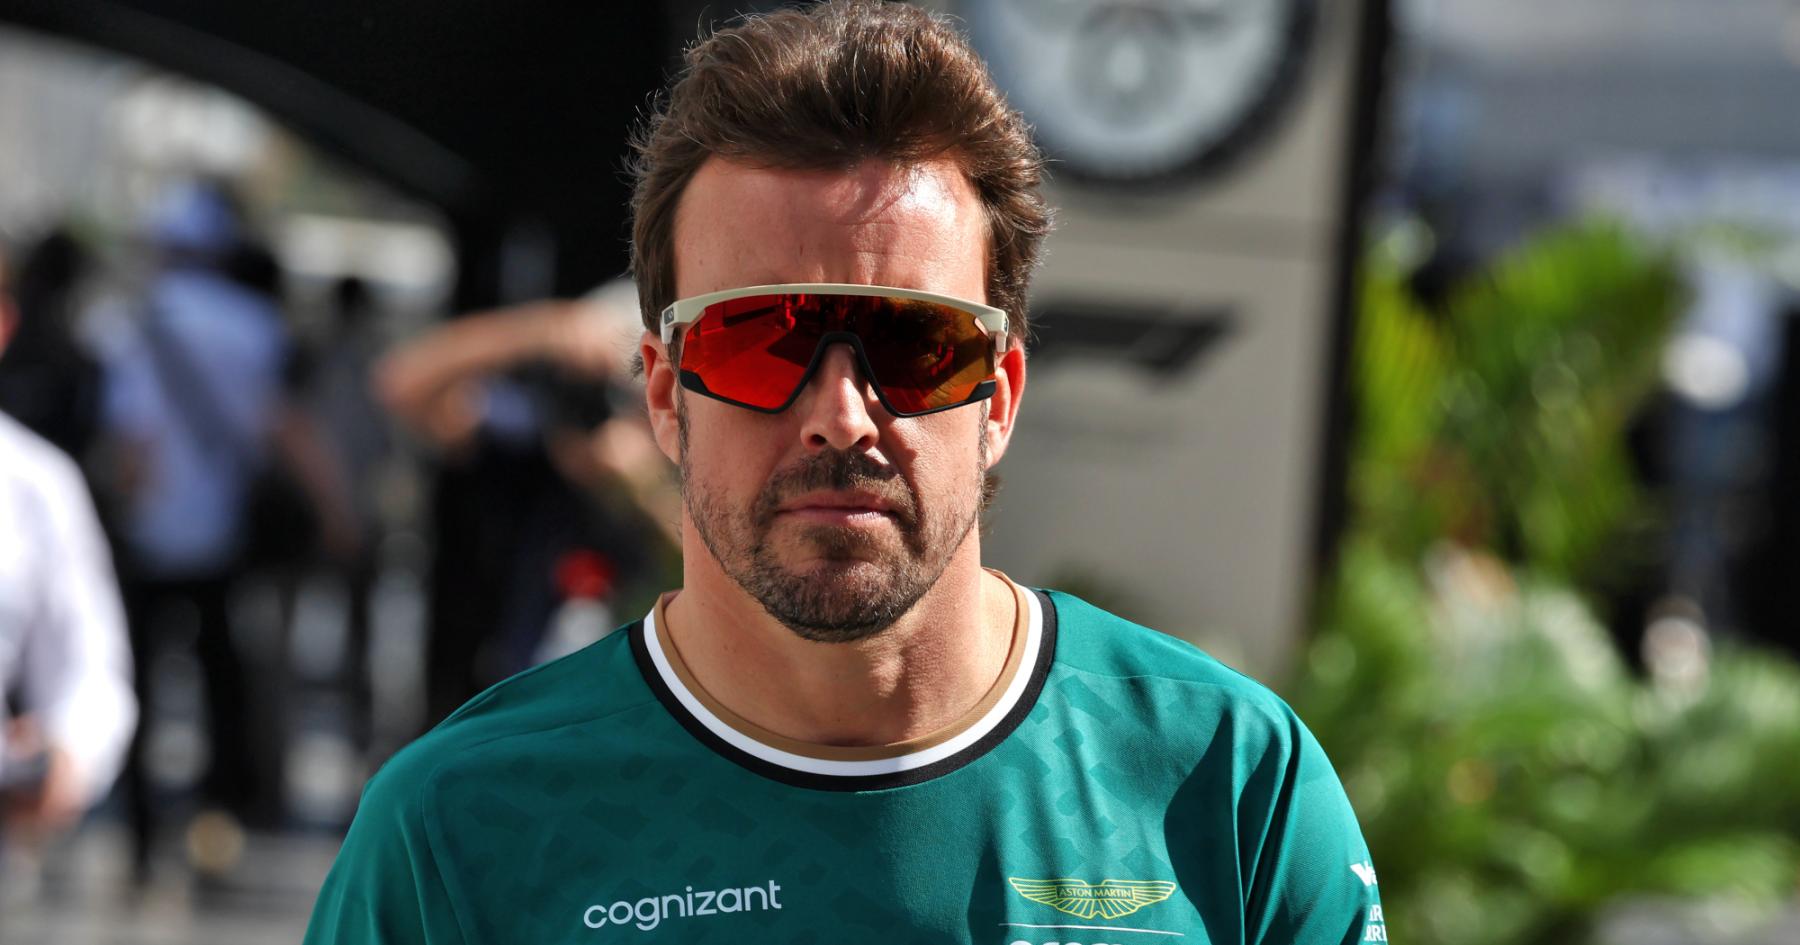 Champion's Corner: Aston Martin's Show of Loyalty to Alonso